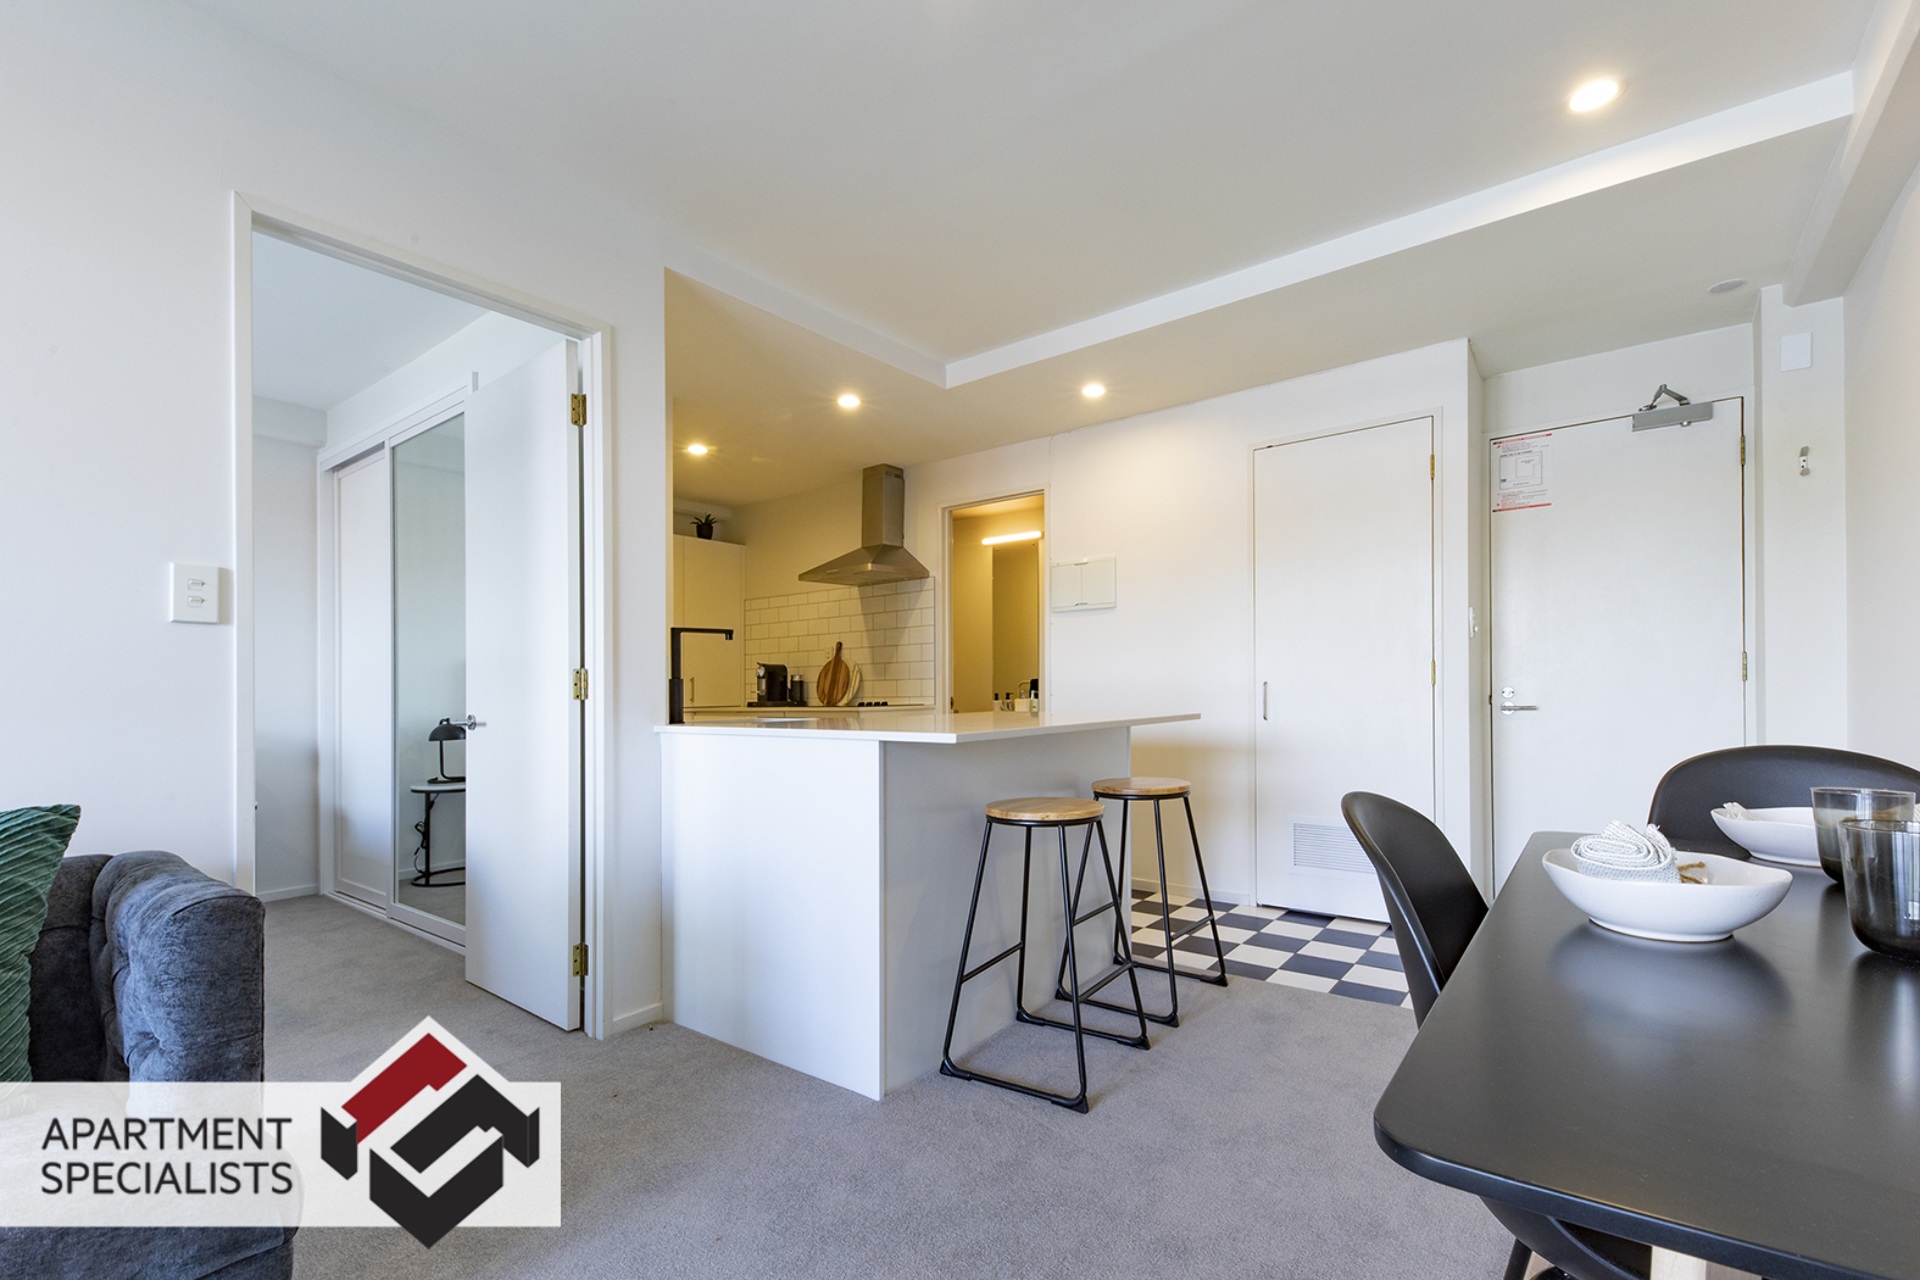 5 | 250 Richmond Road, Ponsonby | Apartment Specialists